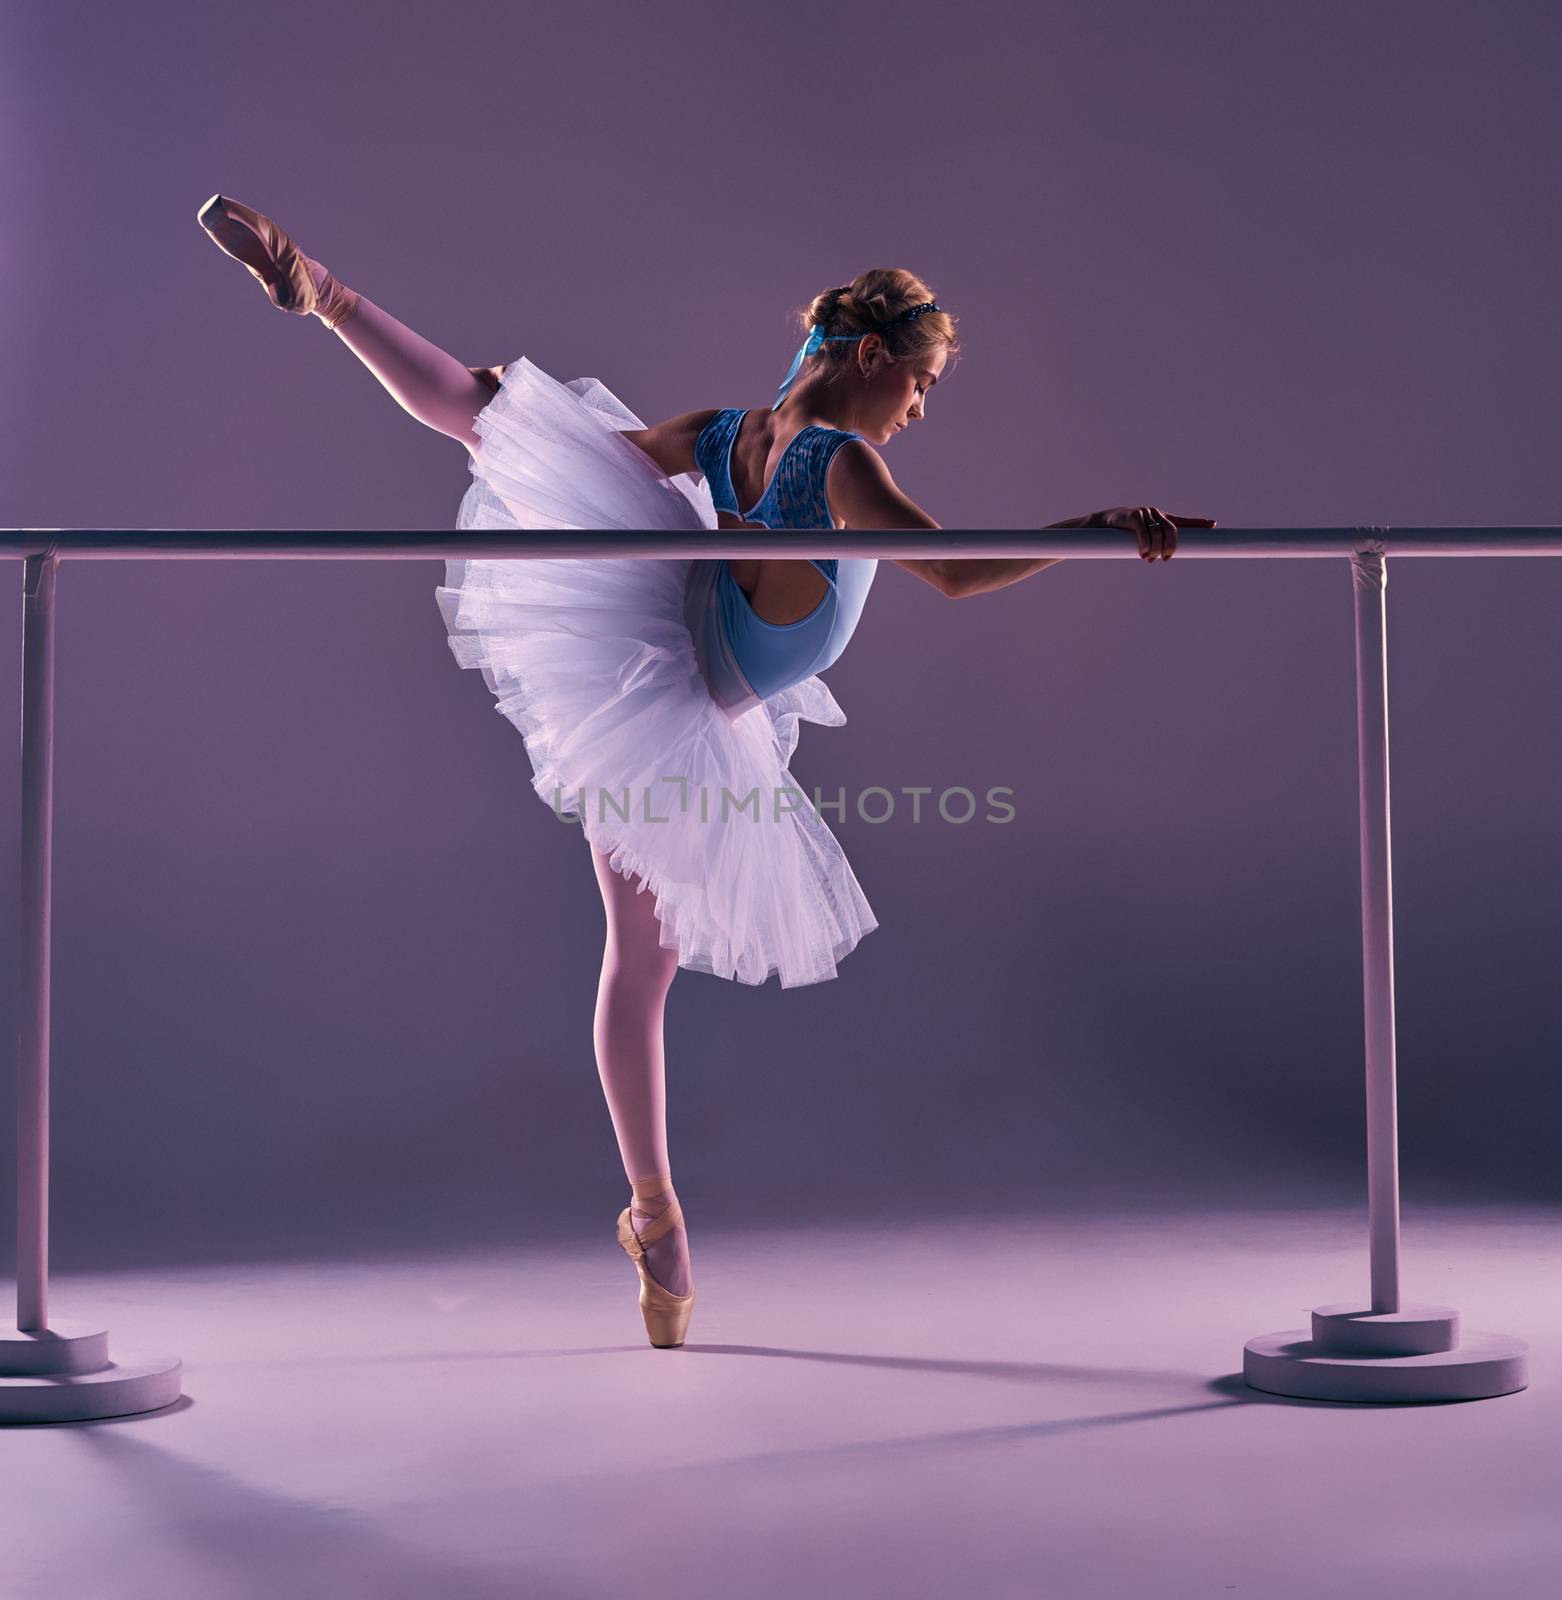 classic ballet dancer in white tutu posing on one leg at ballet barre on a lilac background